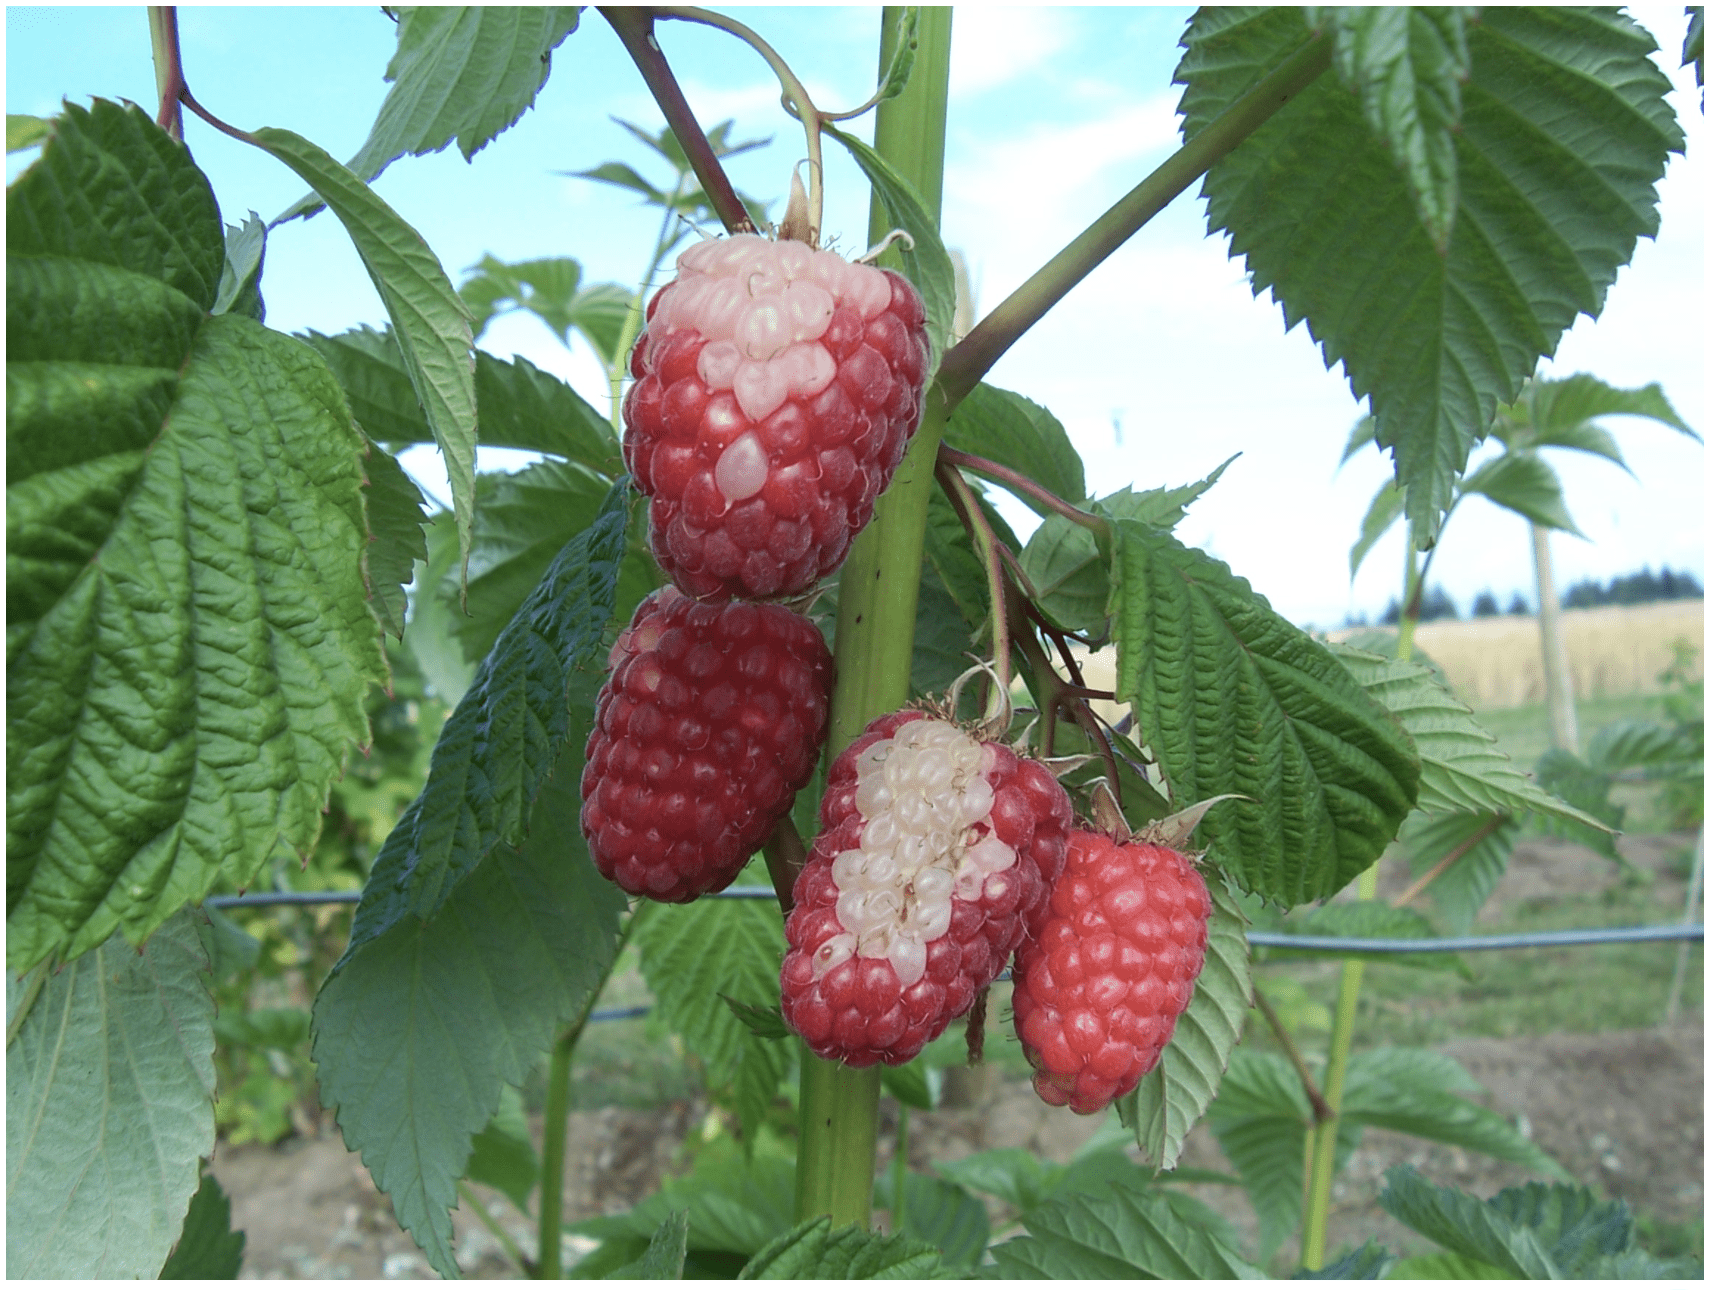 Garden Extension Home in OSU Your Growing | Service Raspberries